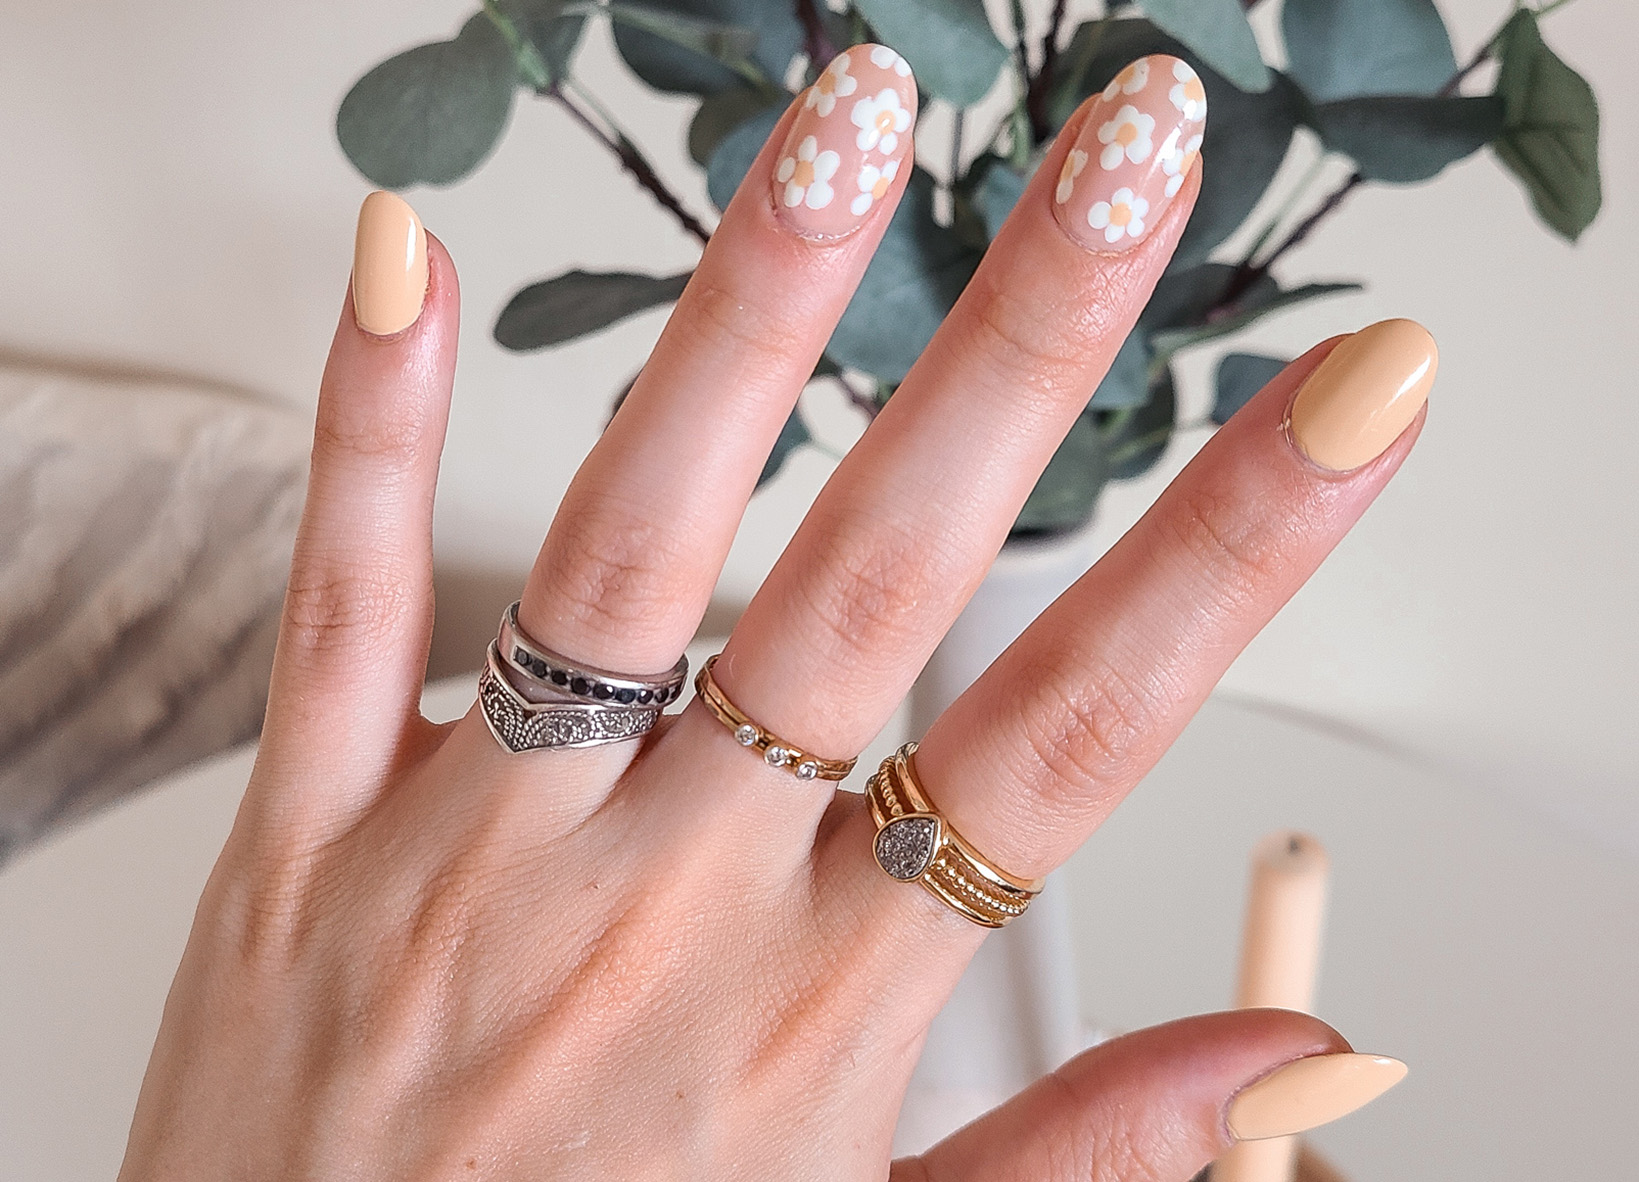 Summer Nails - 2021 Nail Art Trends - A Styled Life by Nayla Smith